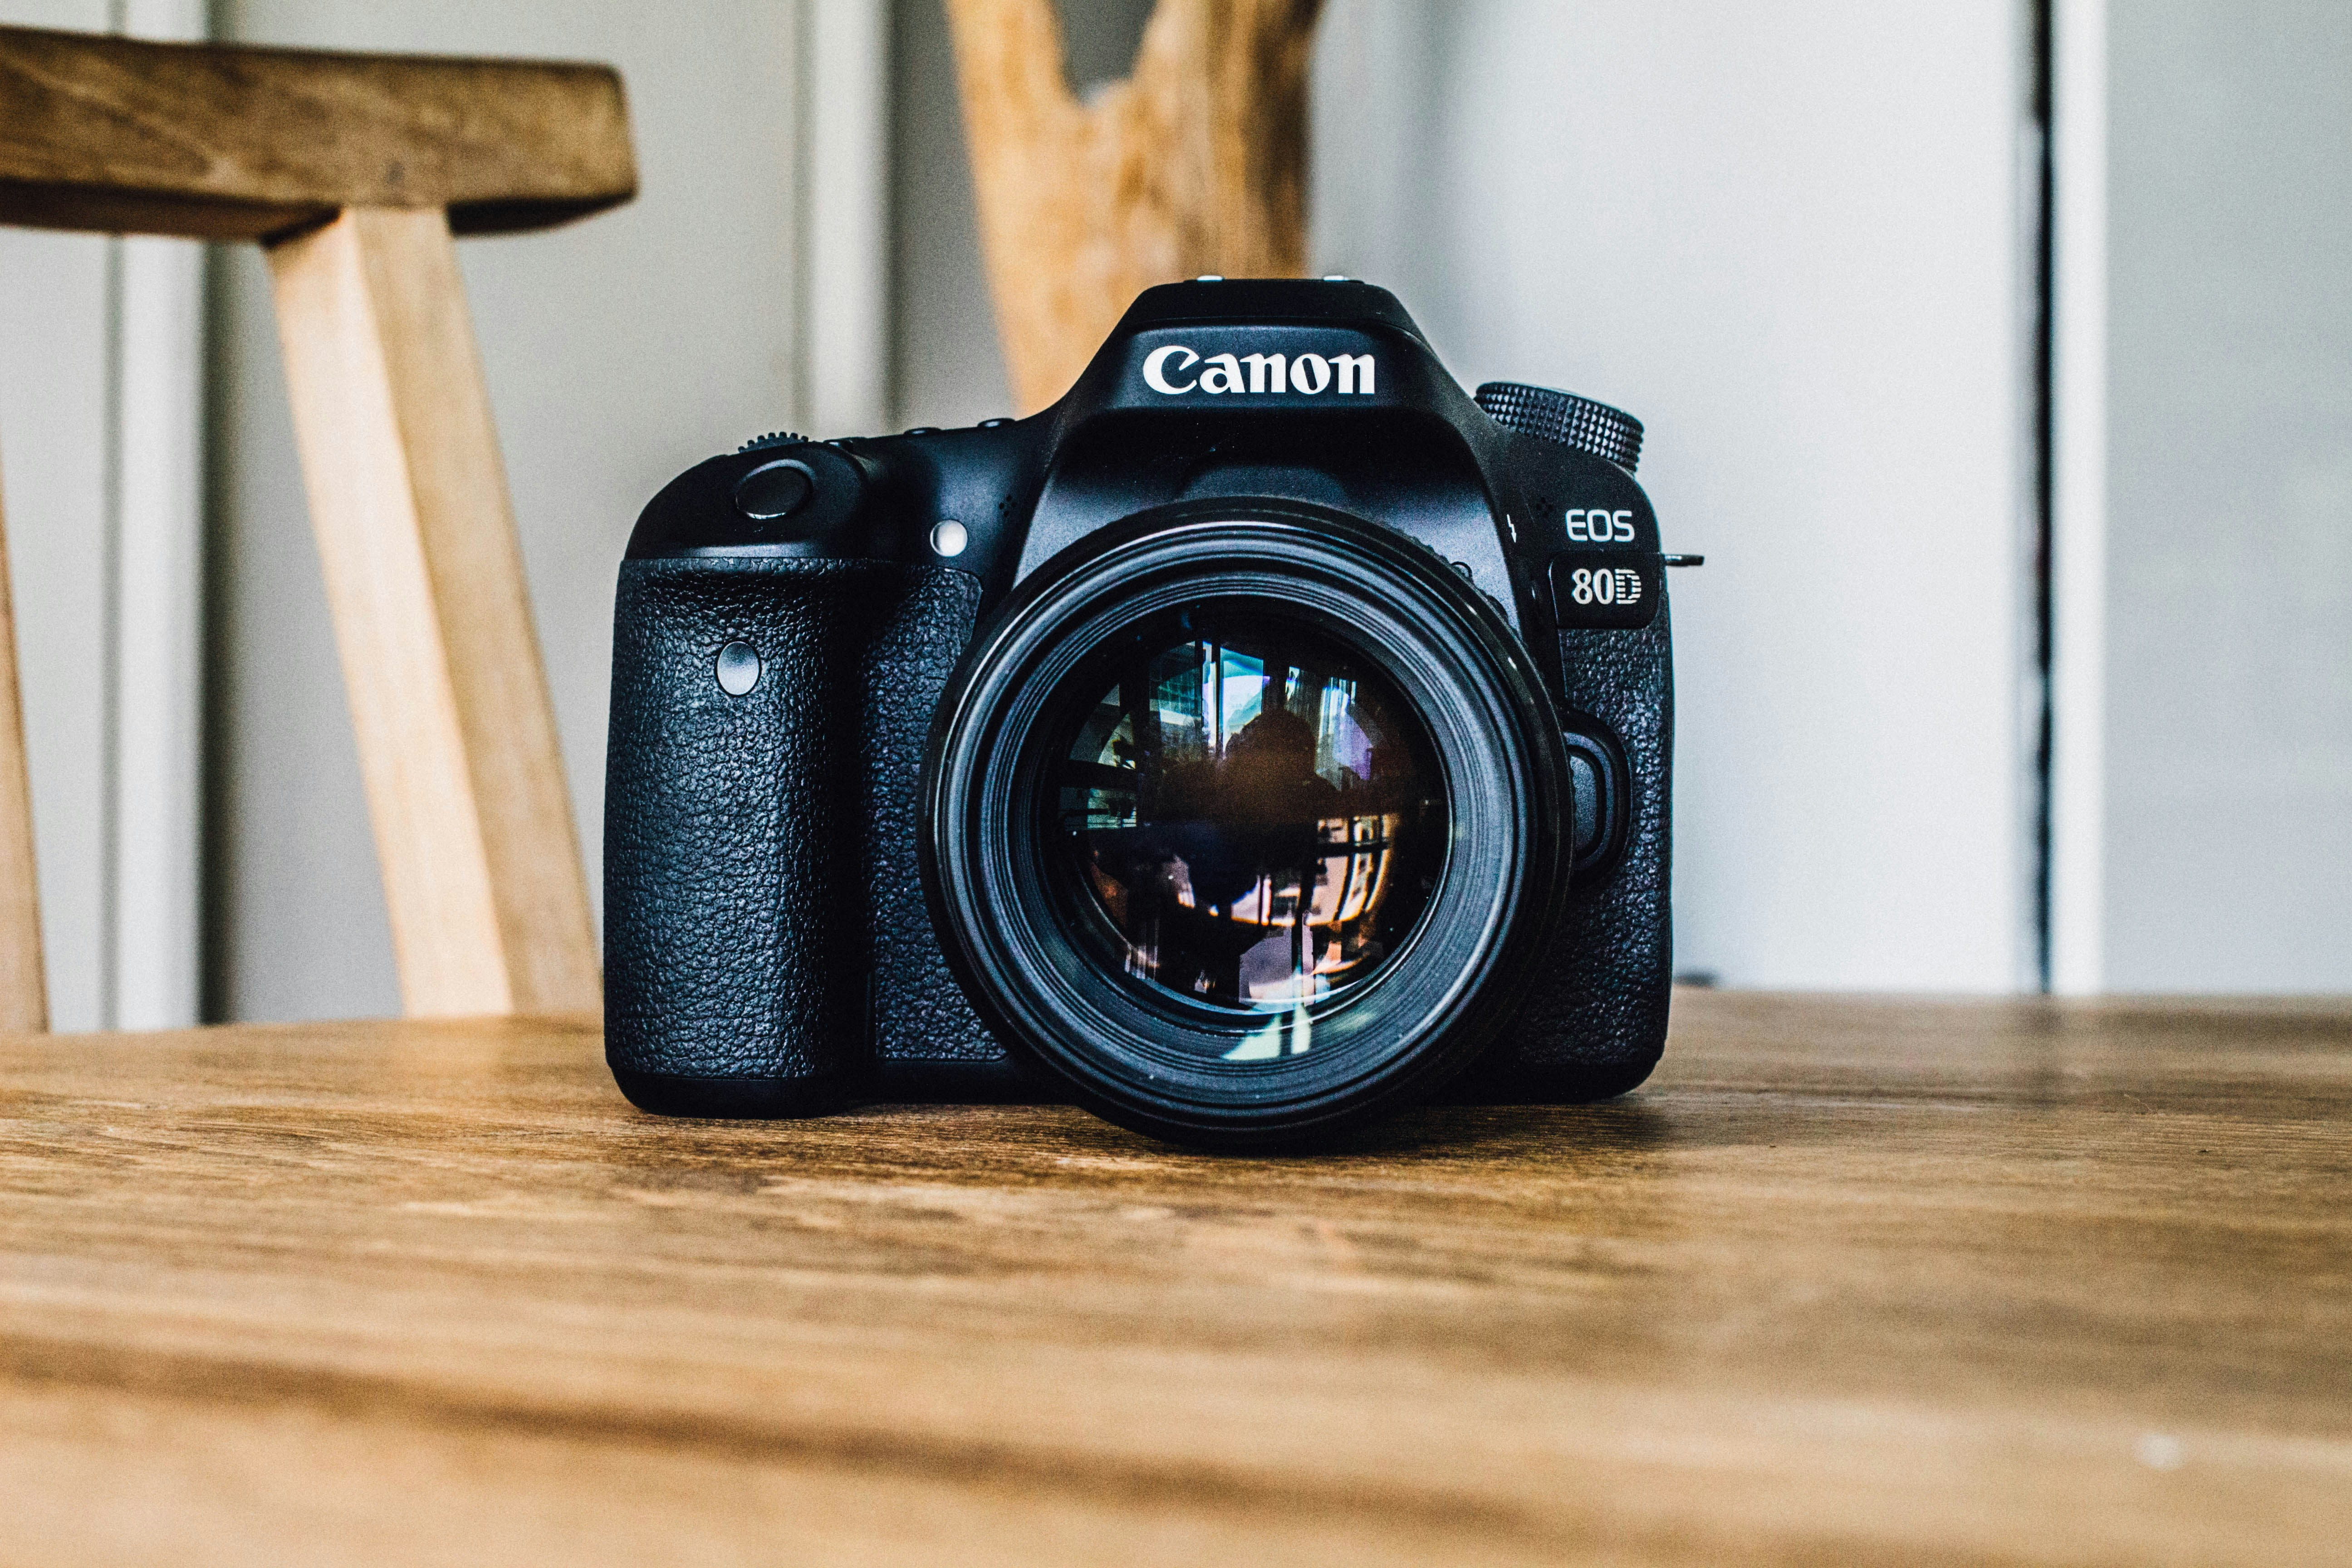 Stock photography of a camera EOS 80D by canon on a wooden table